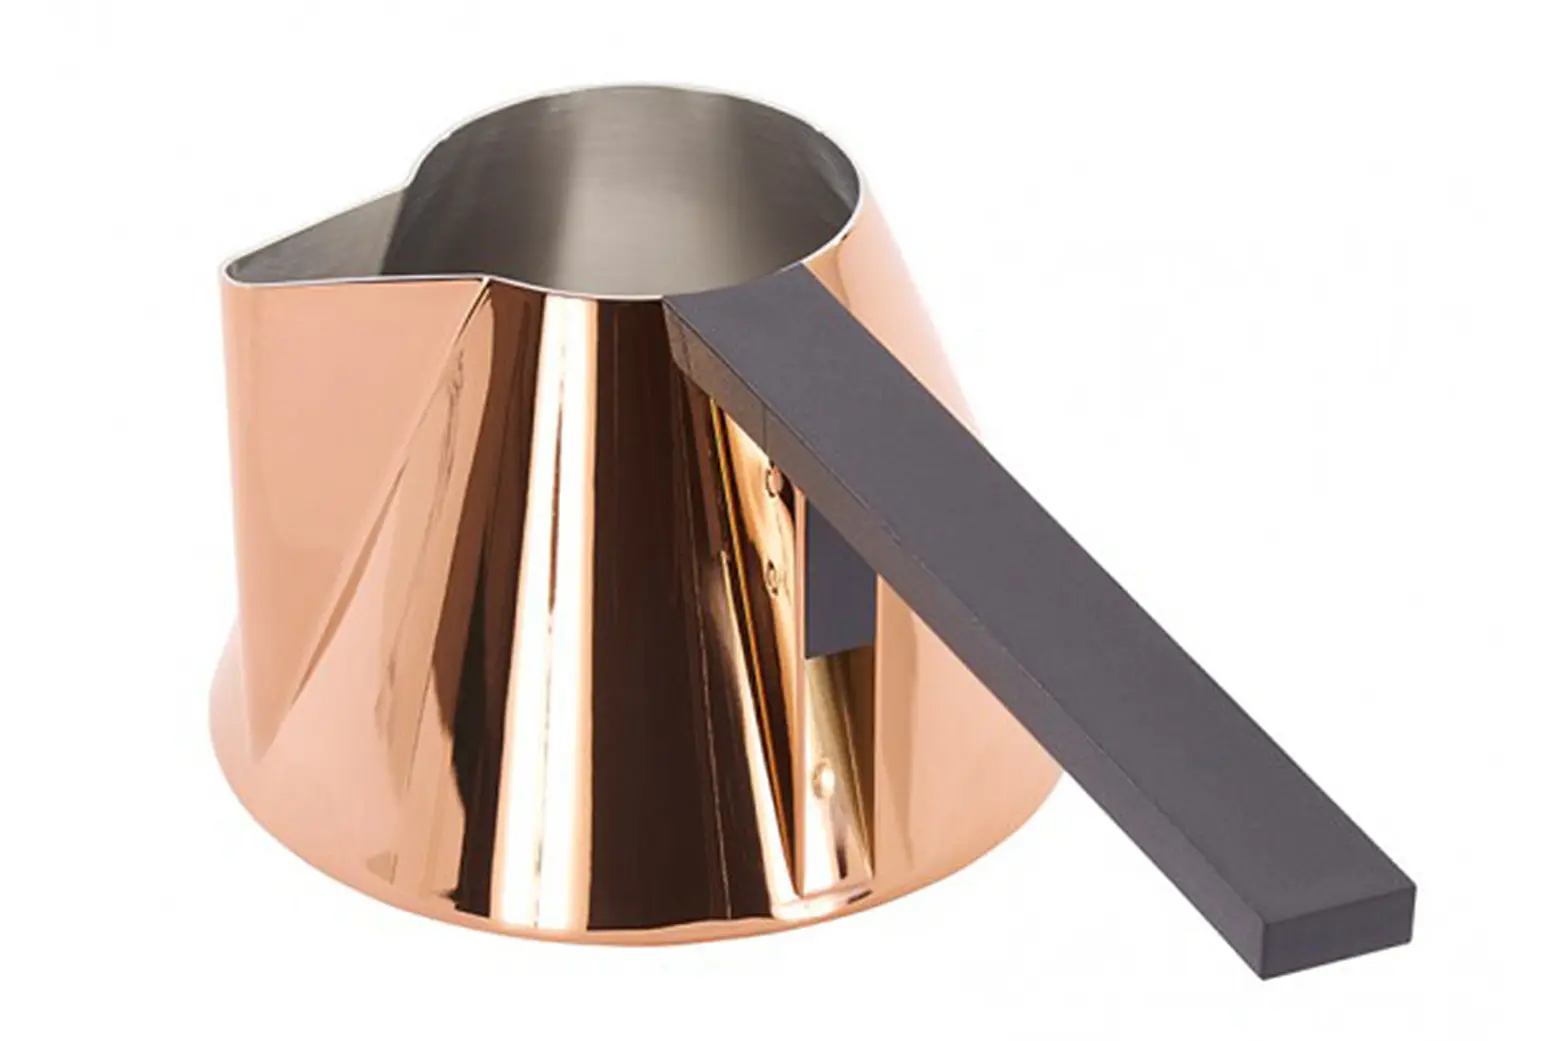 http://thumbs.6sqft.com/wp-content/uploads/2015/10/20052338/Tom-Dixon-Copper-Coffee-Set-Brew-Coffee-Collection-4.jpg?w=1560&format=webp